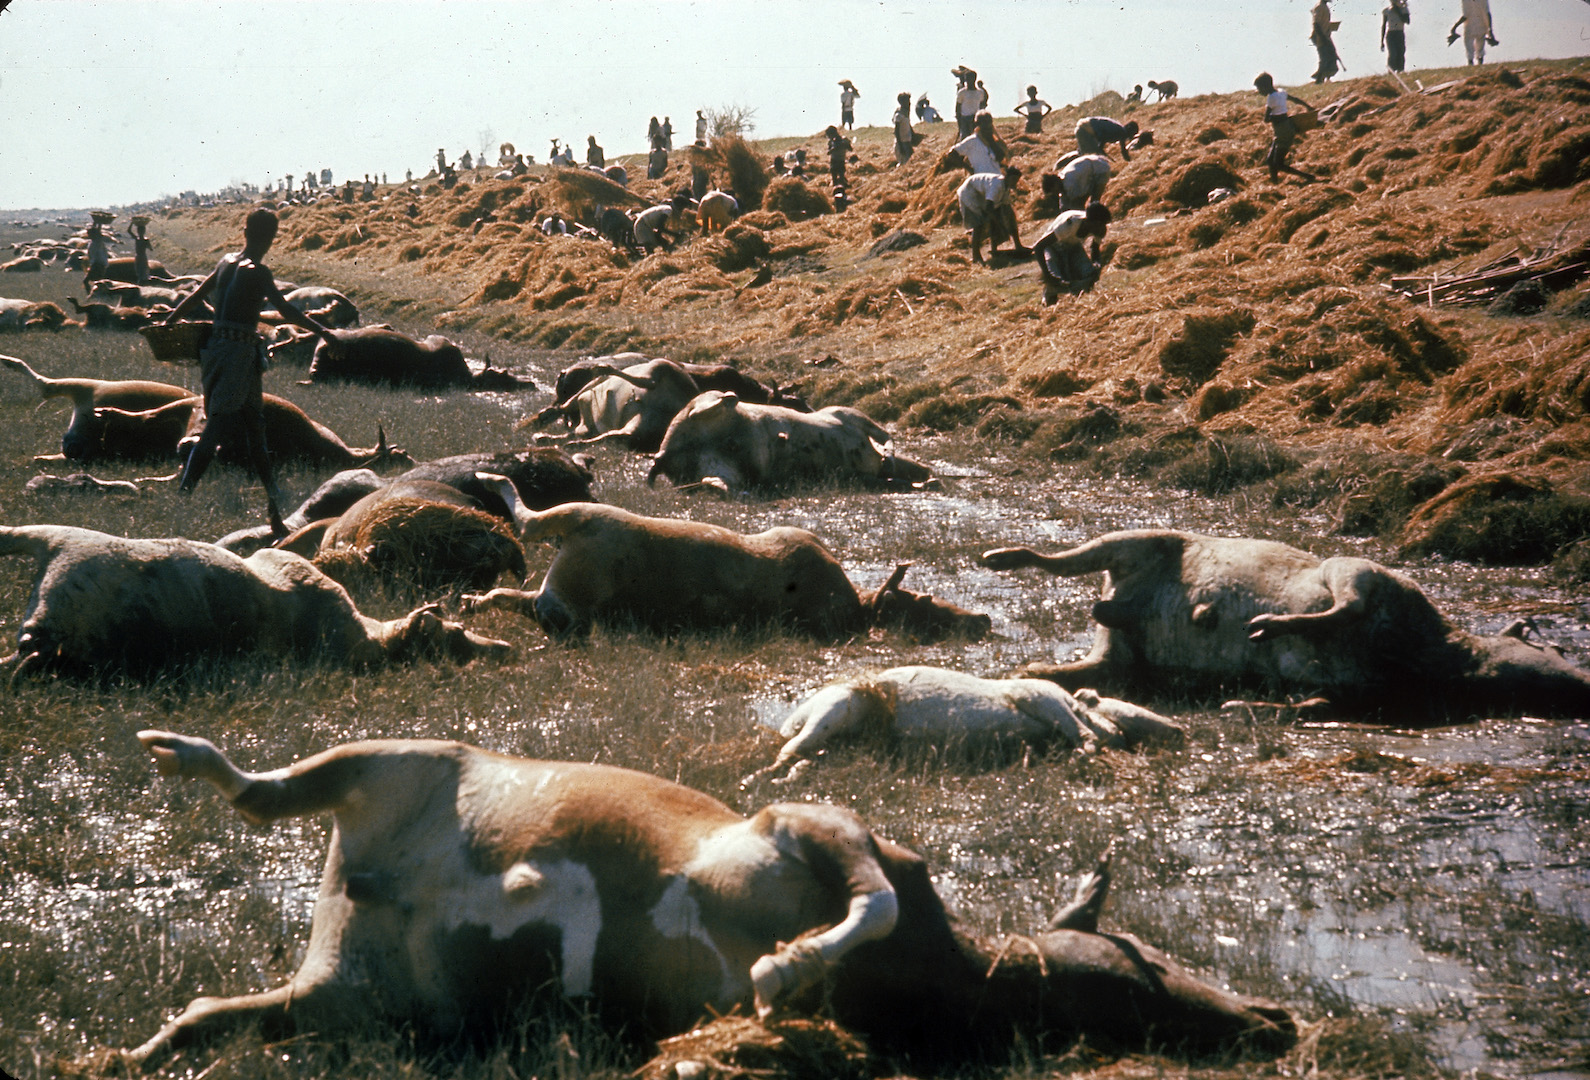 Villagers walk through a field of dead cattle and search for rice and other grains to salvage, near Sonapur, East Pakistan (later Bangladesh), in the aftermath of the massive cyclone and accompanying tidal wave that slammed the area in November 1970.